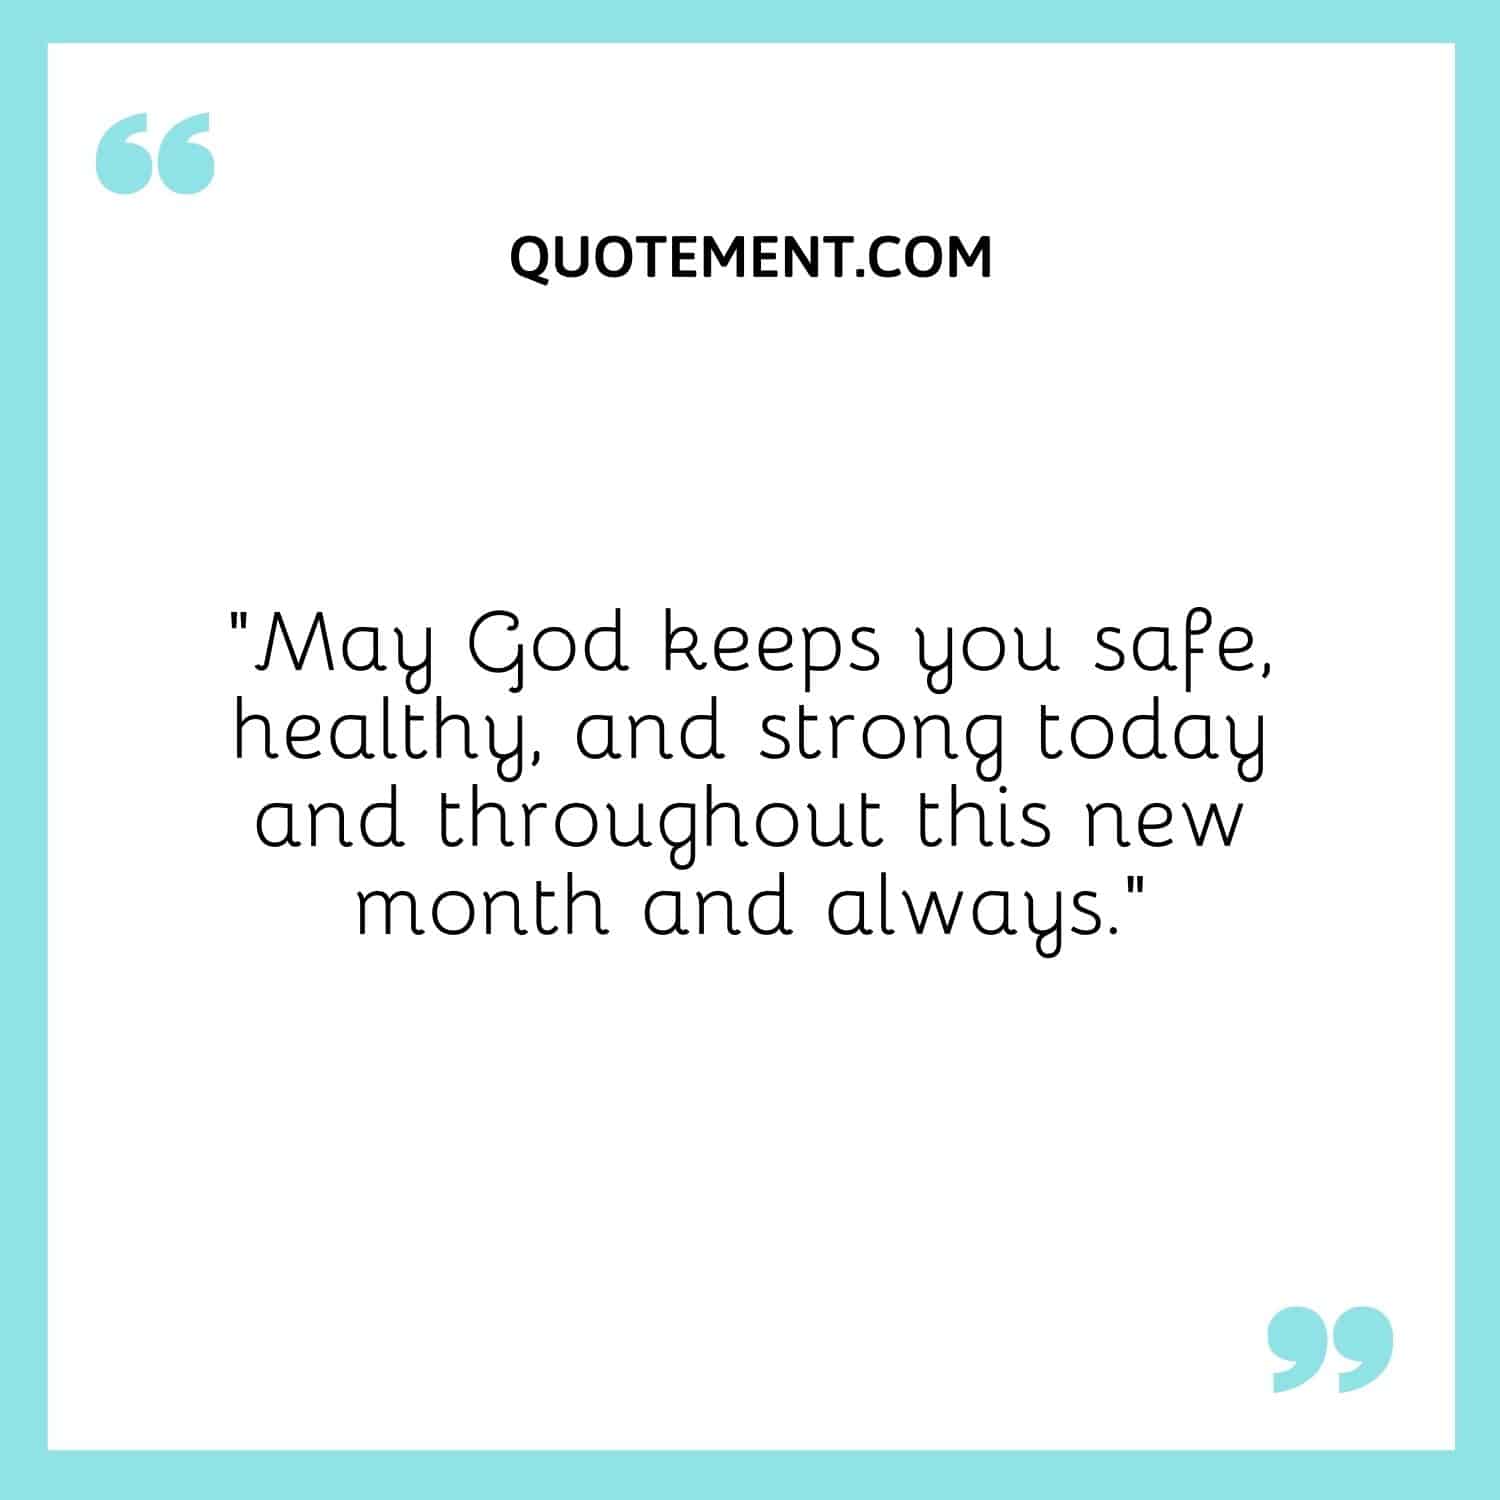 May God keeps you safe, healthy, and strong today and throughout this new month and always